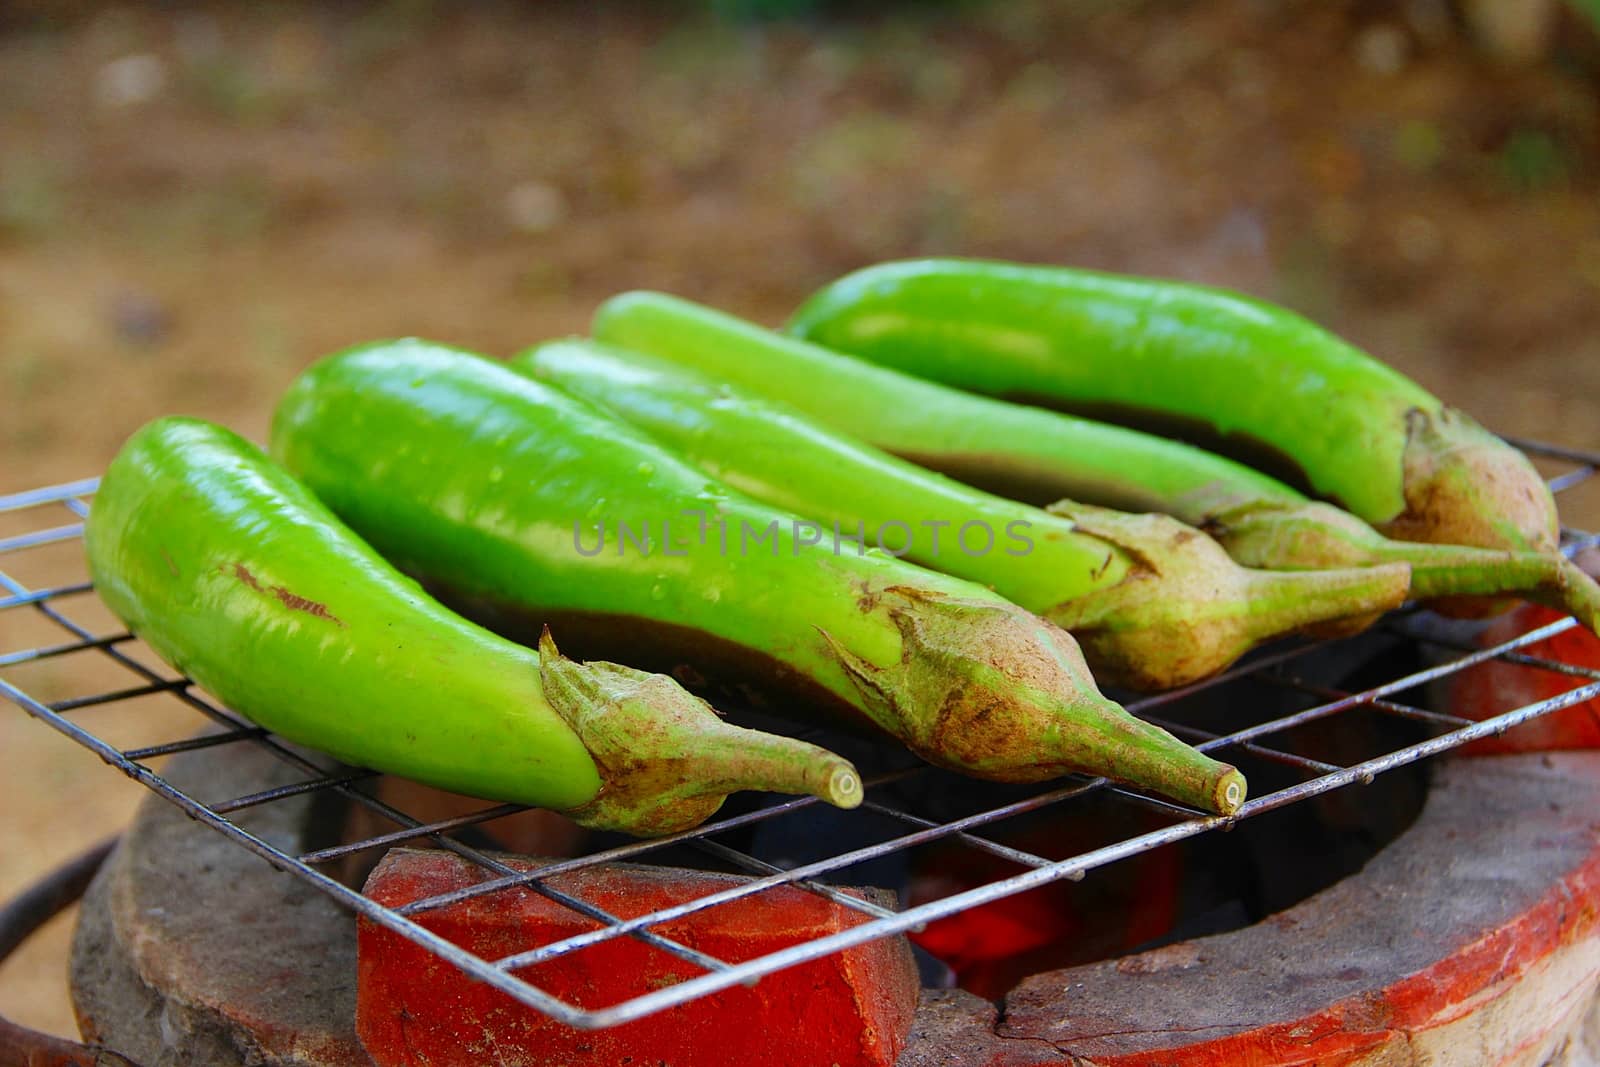 Grilling eggplants on earthen stove, old style Asian cooking